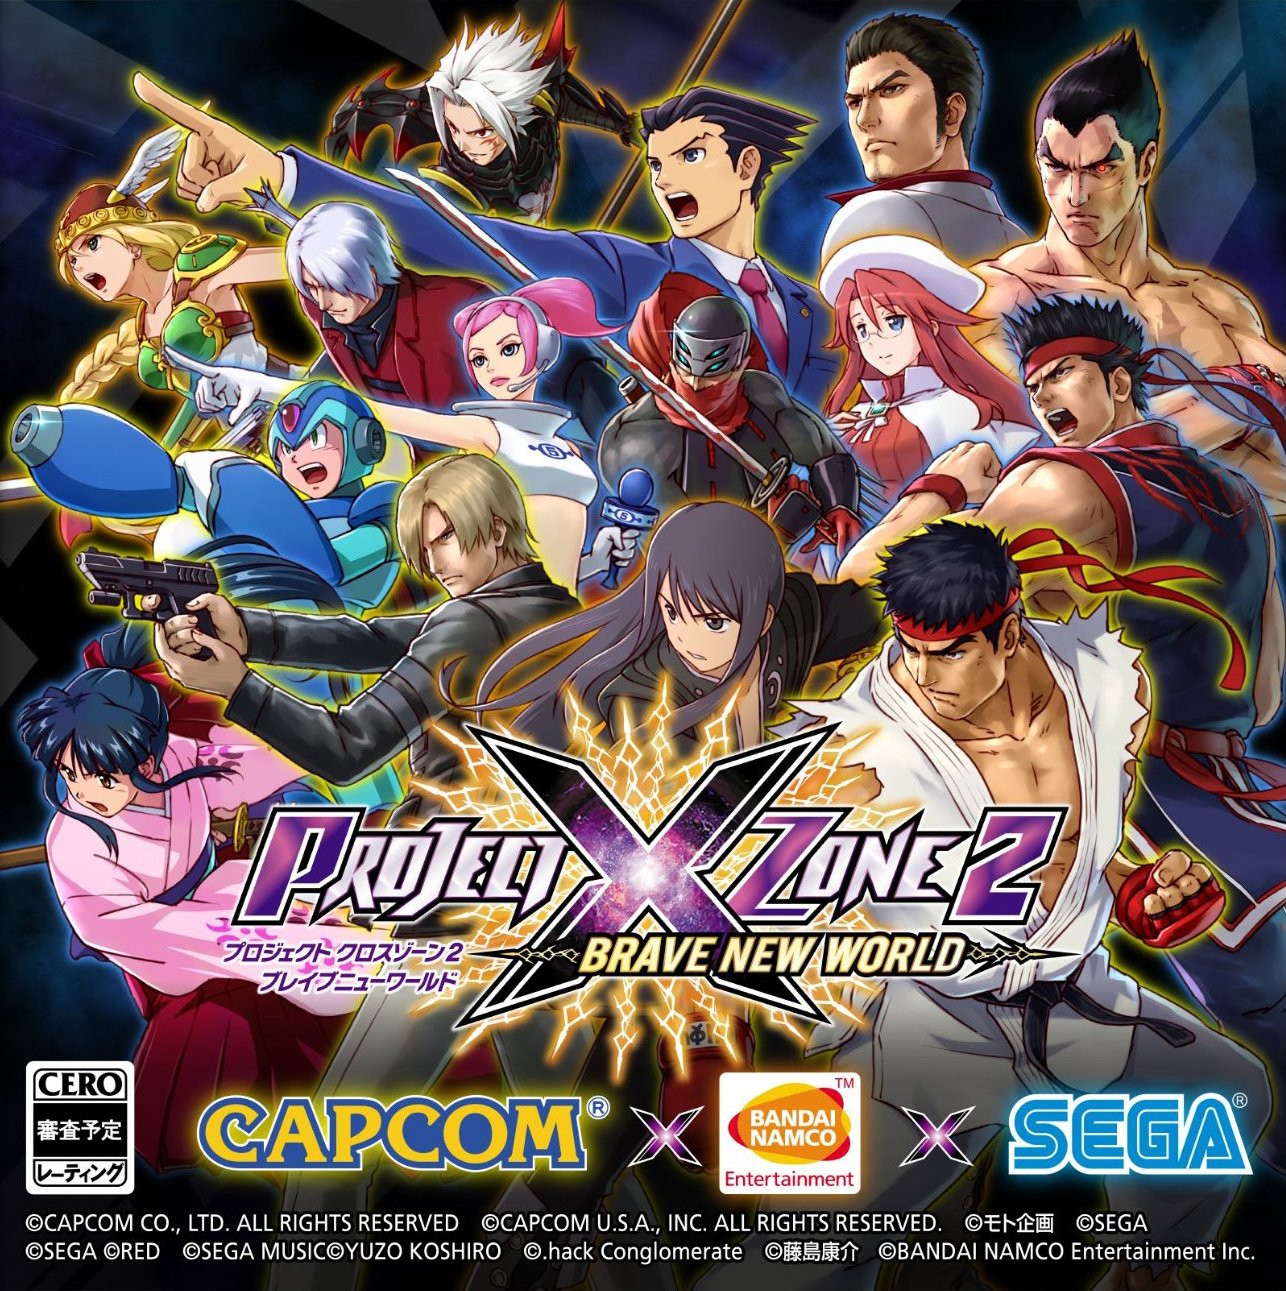 Image of Project X Zone 2